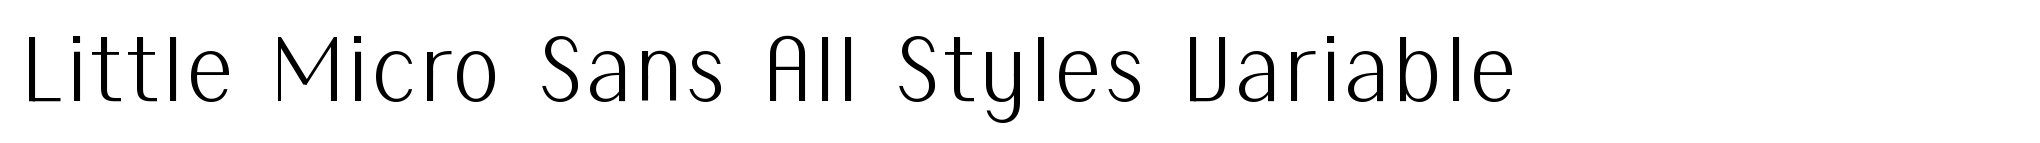 Little Micro Sans All Styles Variable image